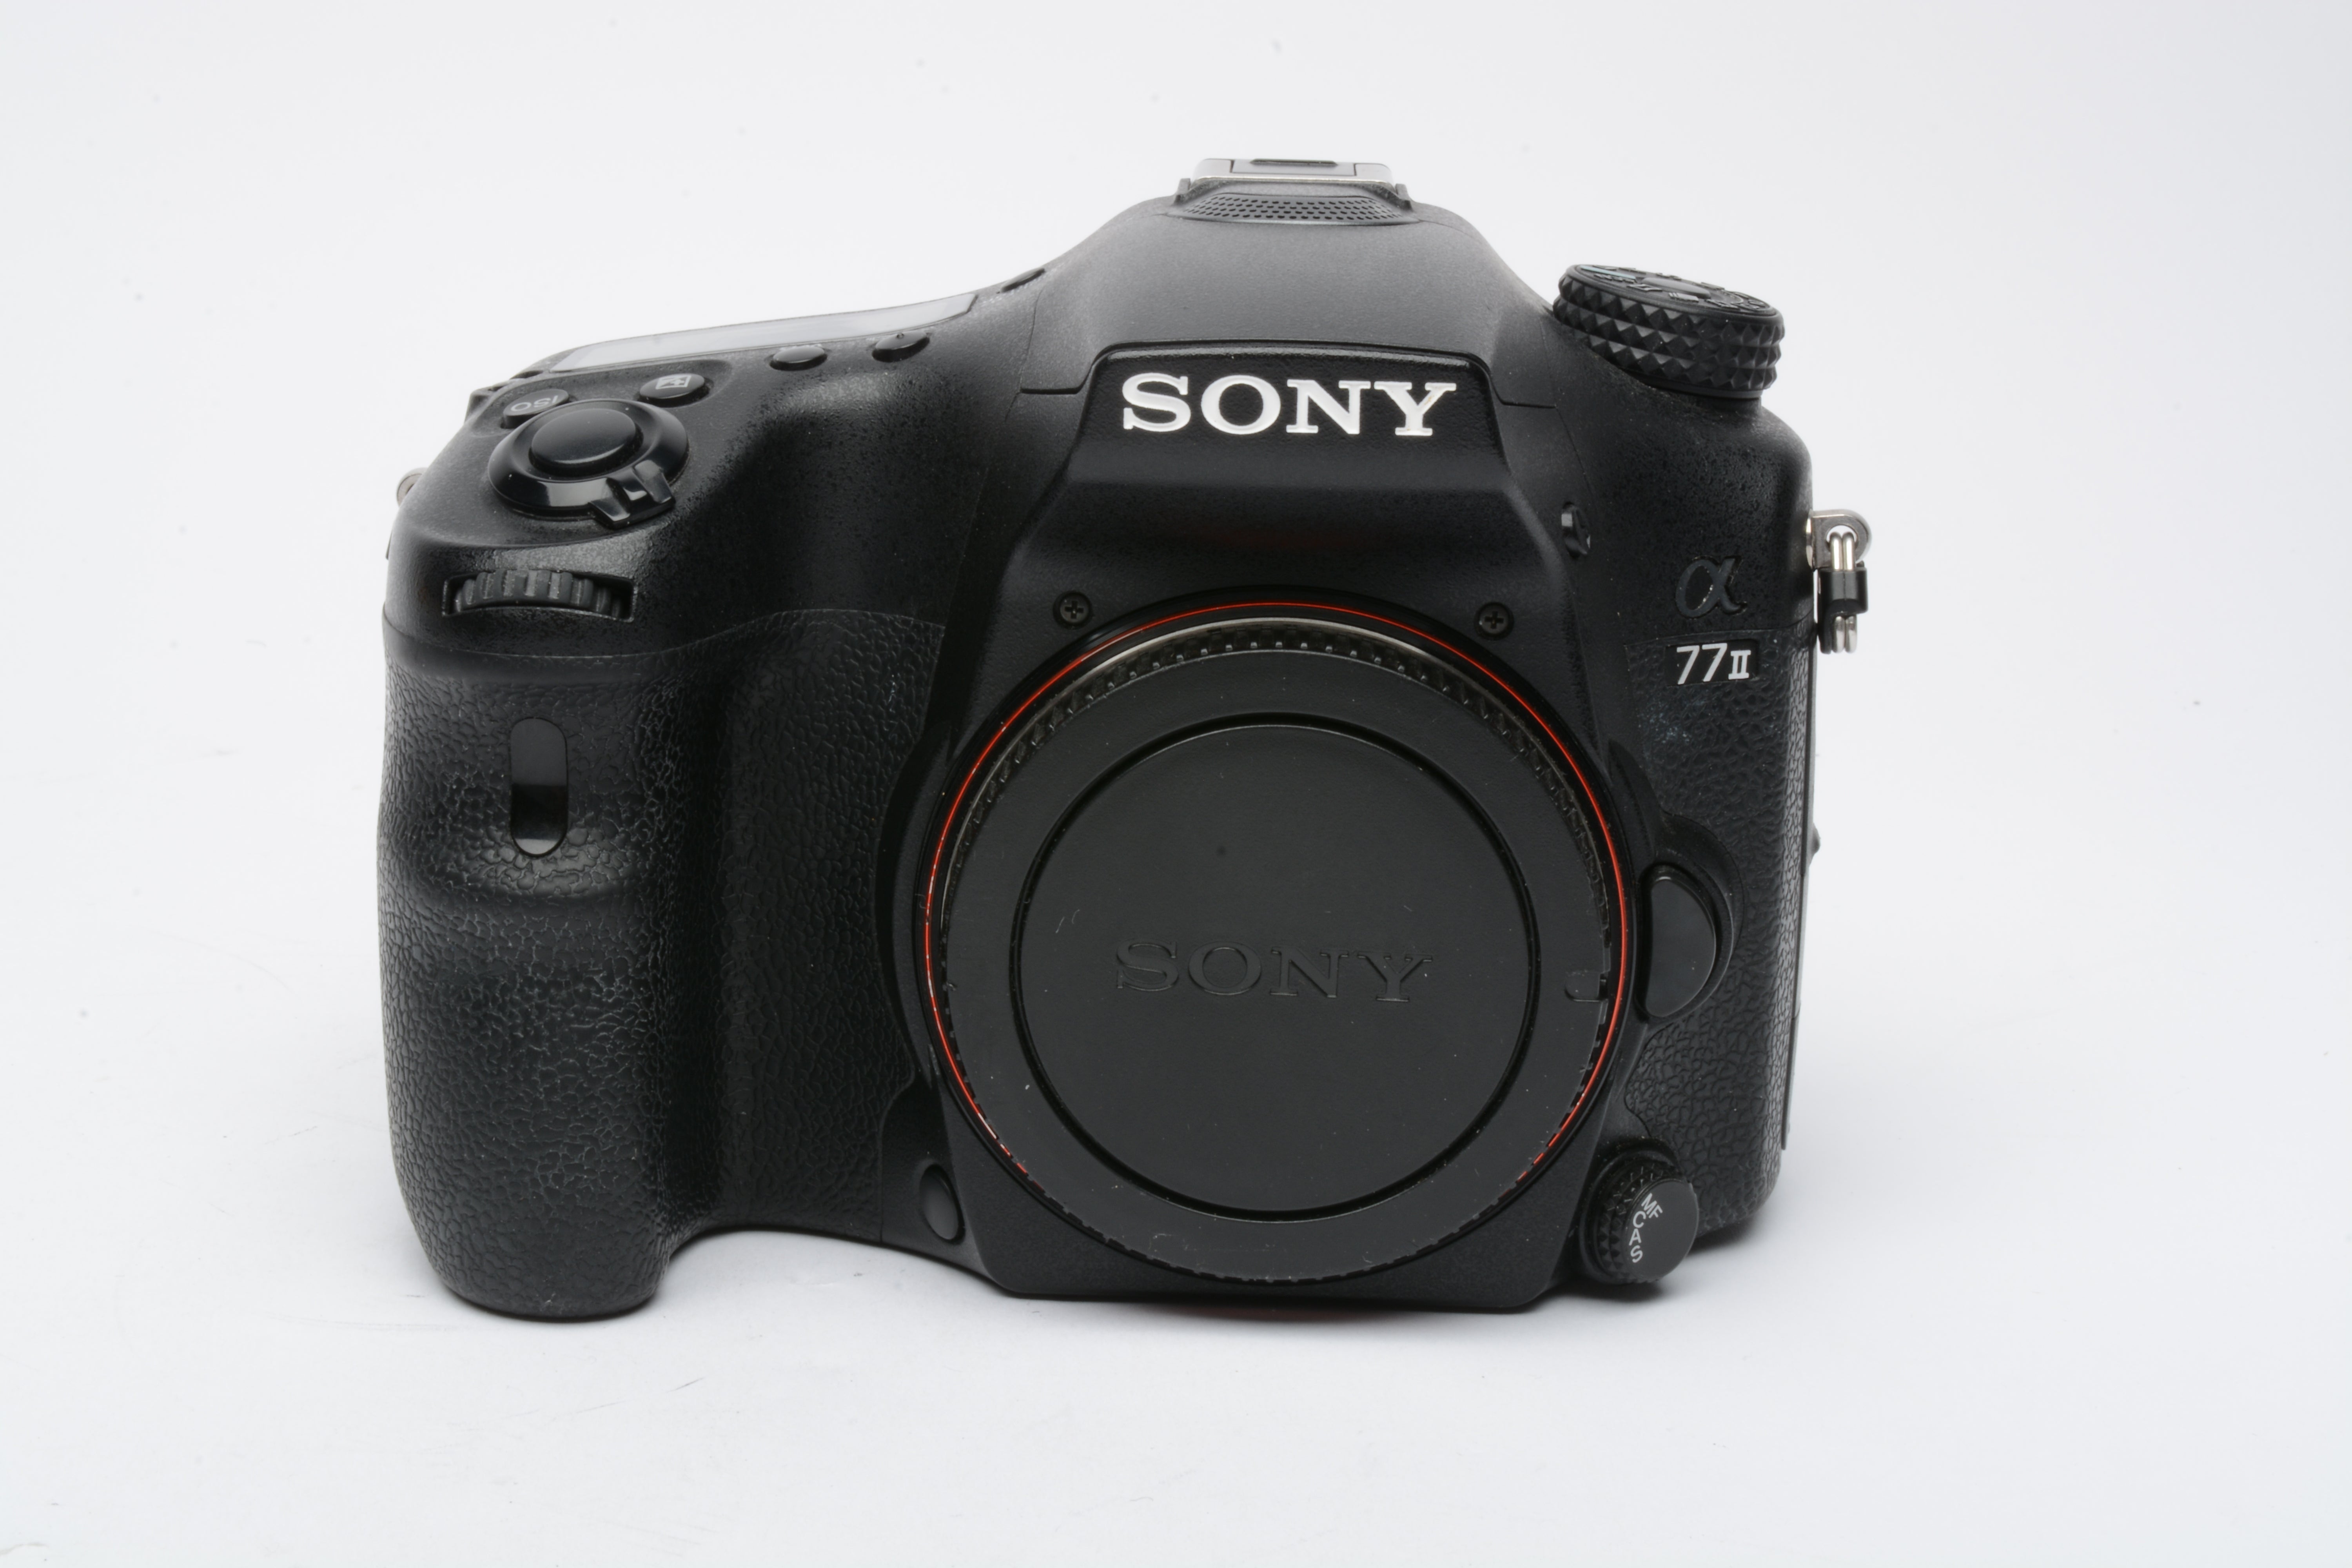 Sony A77 II ILCA-77M2 DSLR Body, 2batts, charger, manual, only